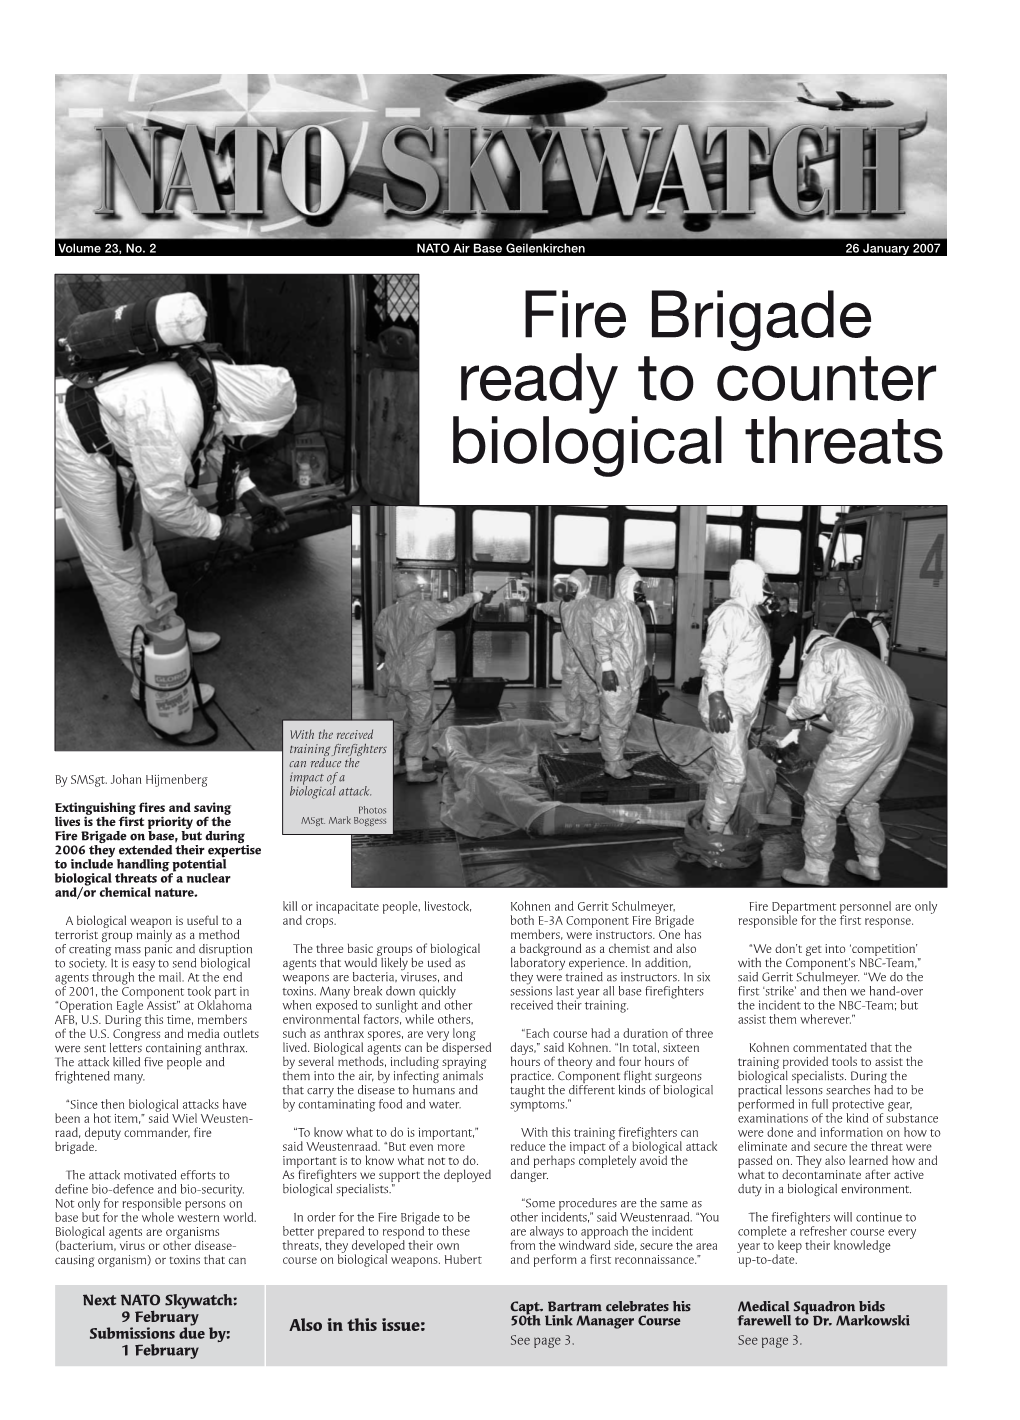 Fire Brigade Ready to Counter Biological Threats